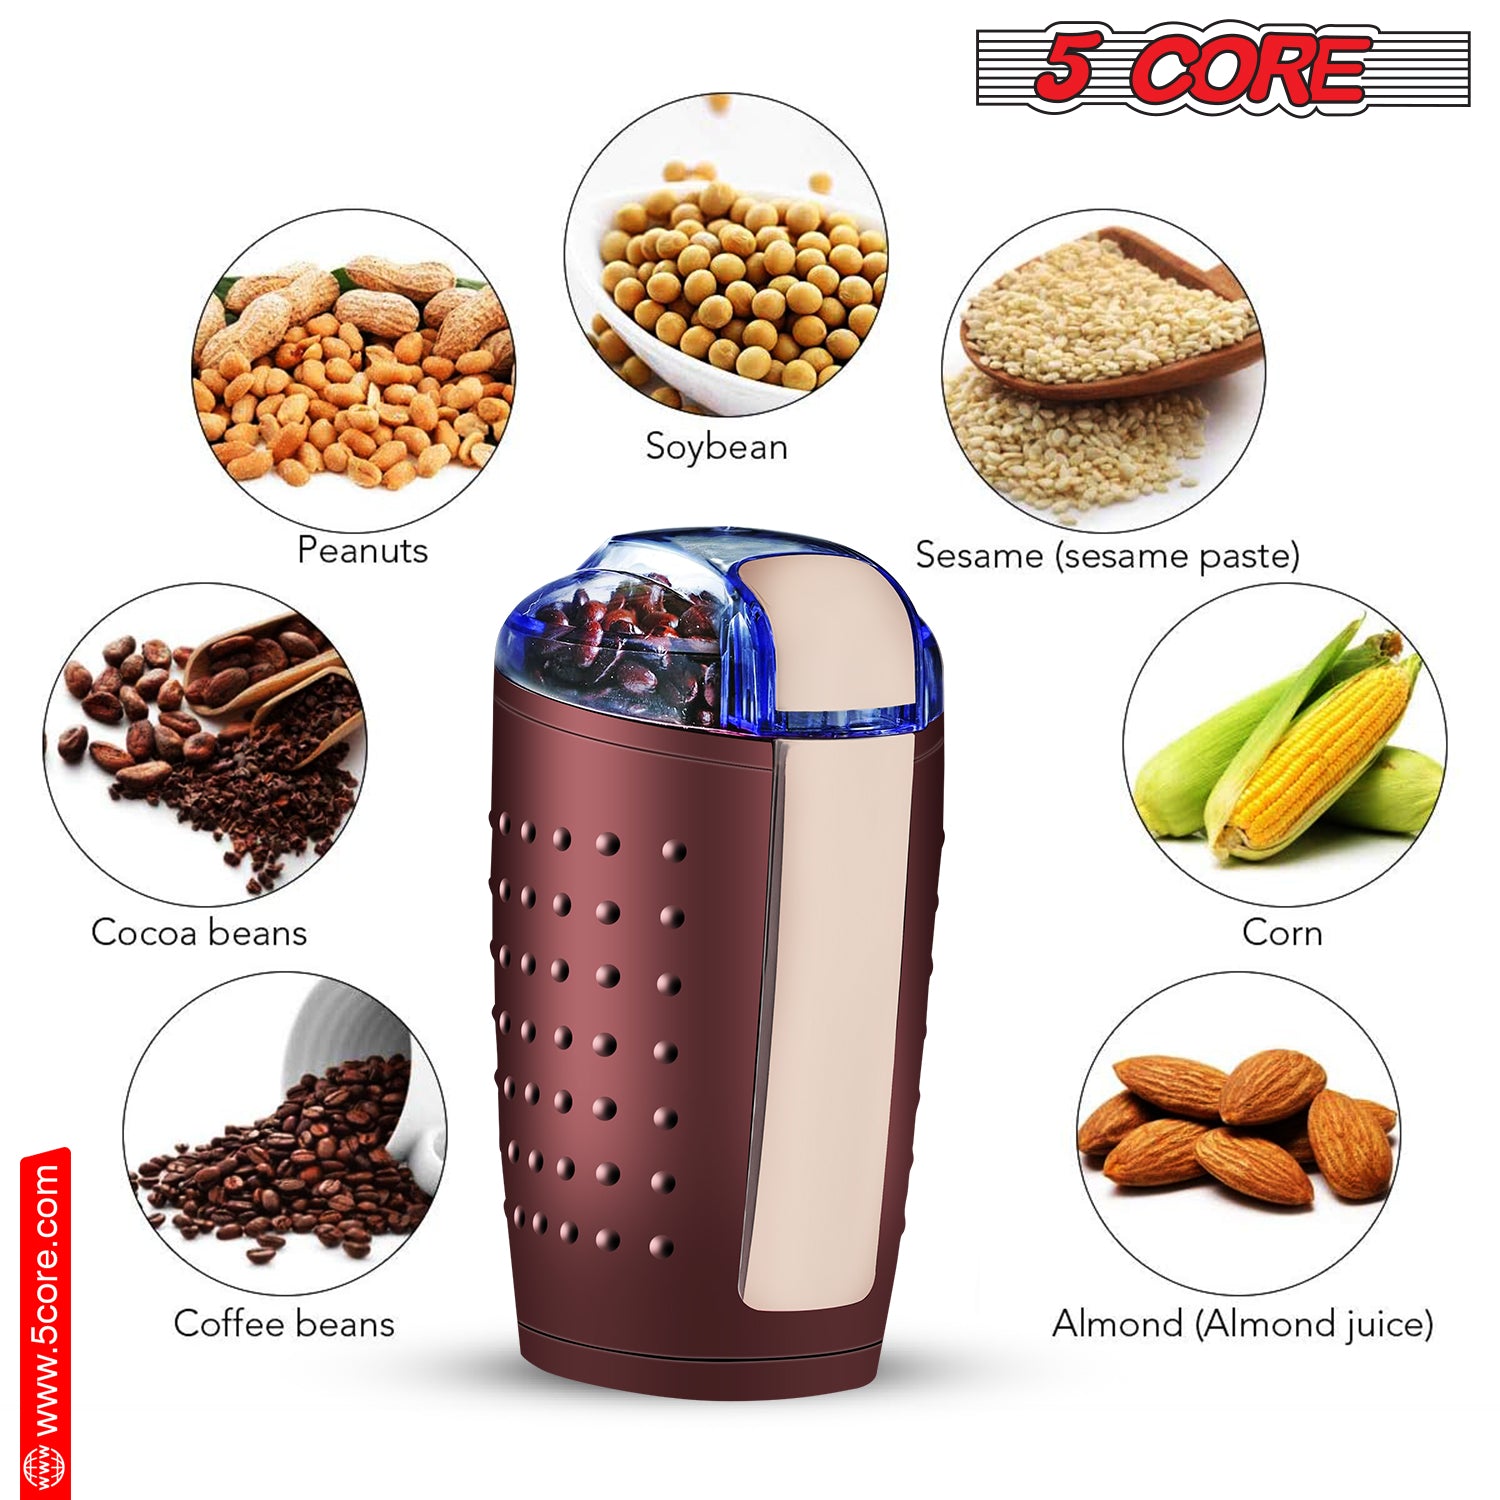 Home Coffee Grinding Made Easy with 5 Core 85 Gram Grinder, 150W Motor in Brown